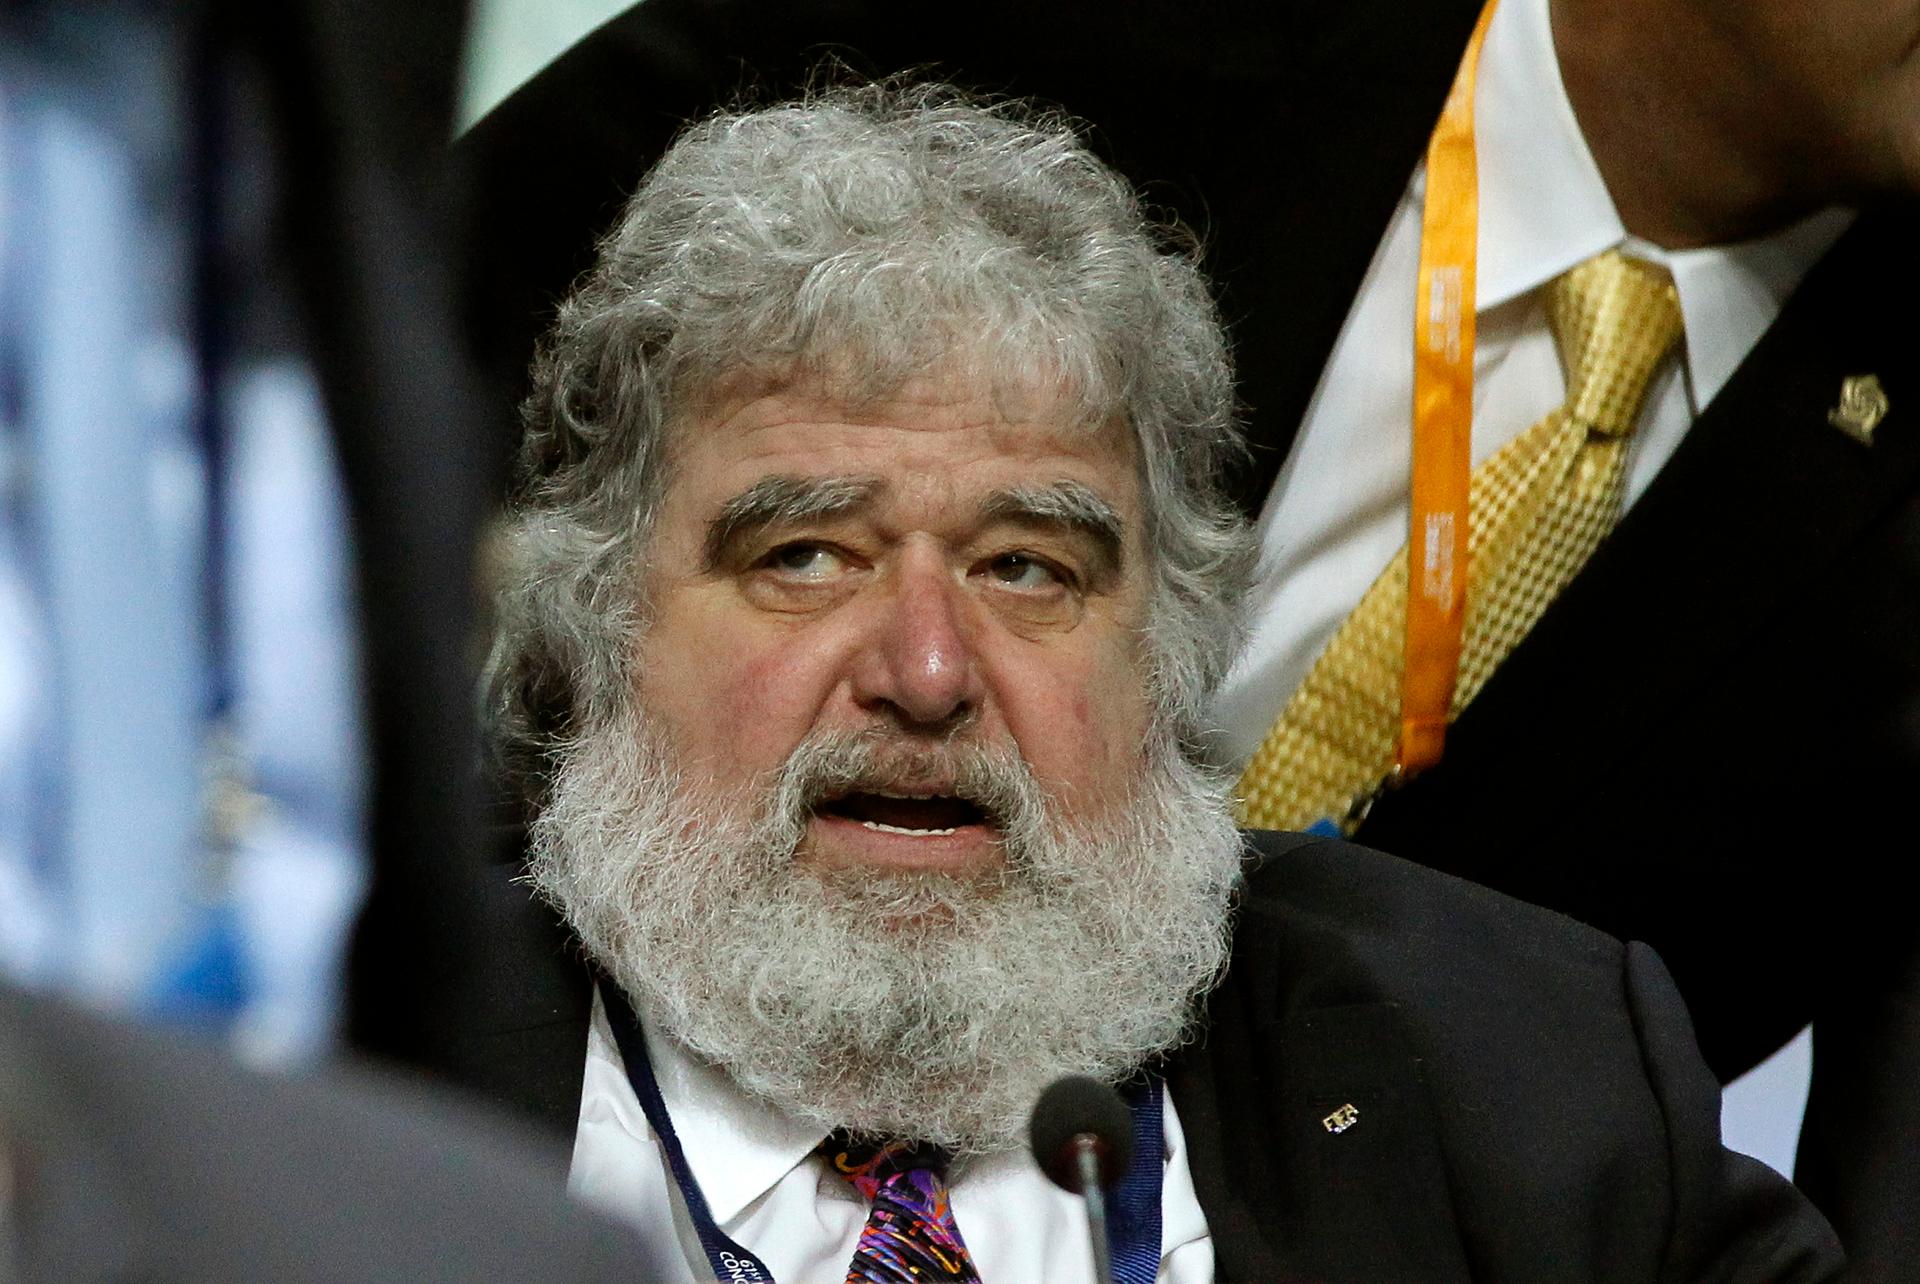 Chuck Blazer, for nearly two decades the most senior American official at FIFA, , was among those whose guilty pleas were unsealed Wednesday by U.S. authorities. Blazer pocketed millions of dollars in marketing commissions and avoided paying taxes. He has